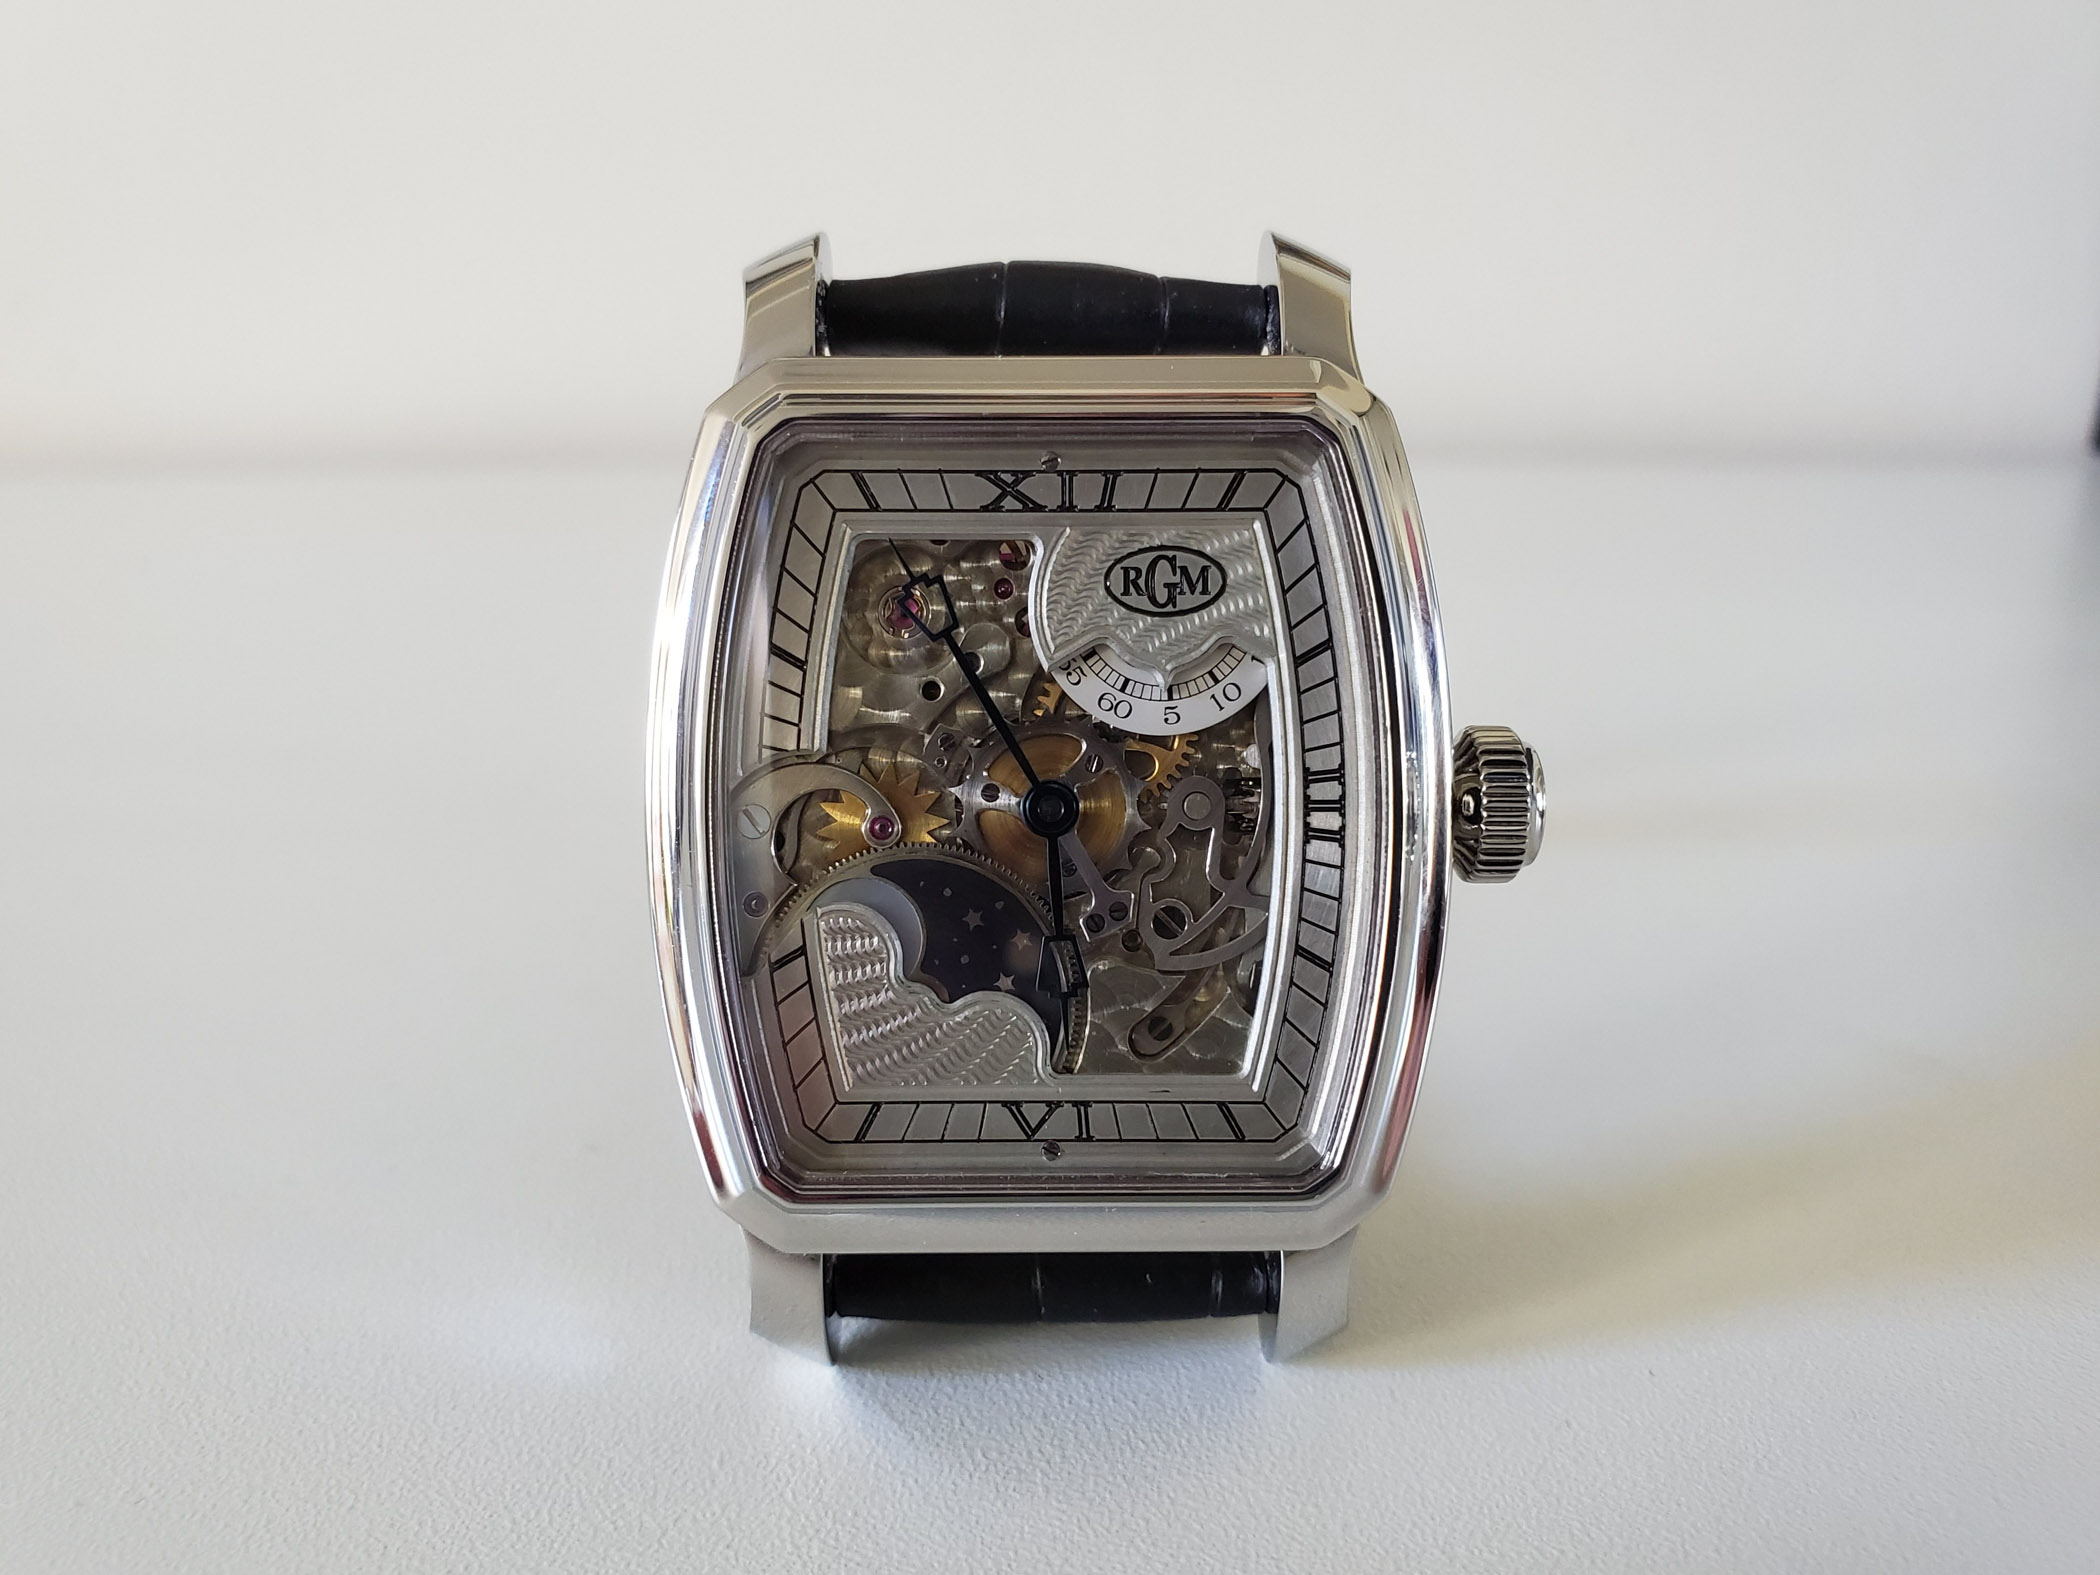 RGM Caliber 20 - Classic American-Made Watch - Review